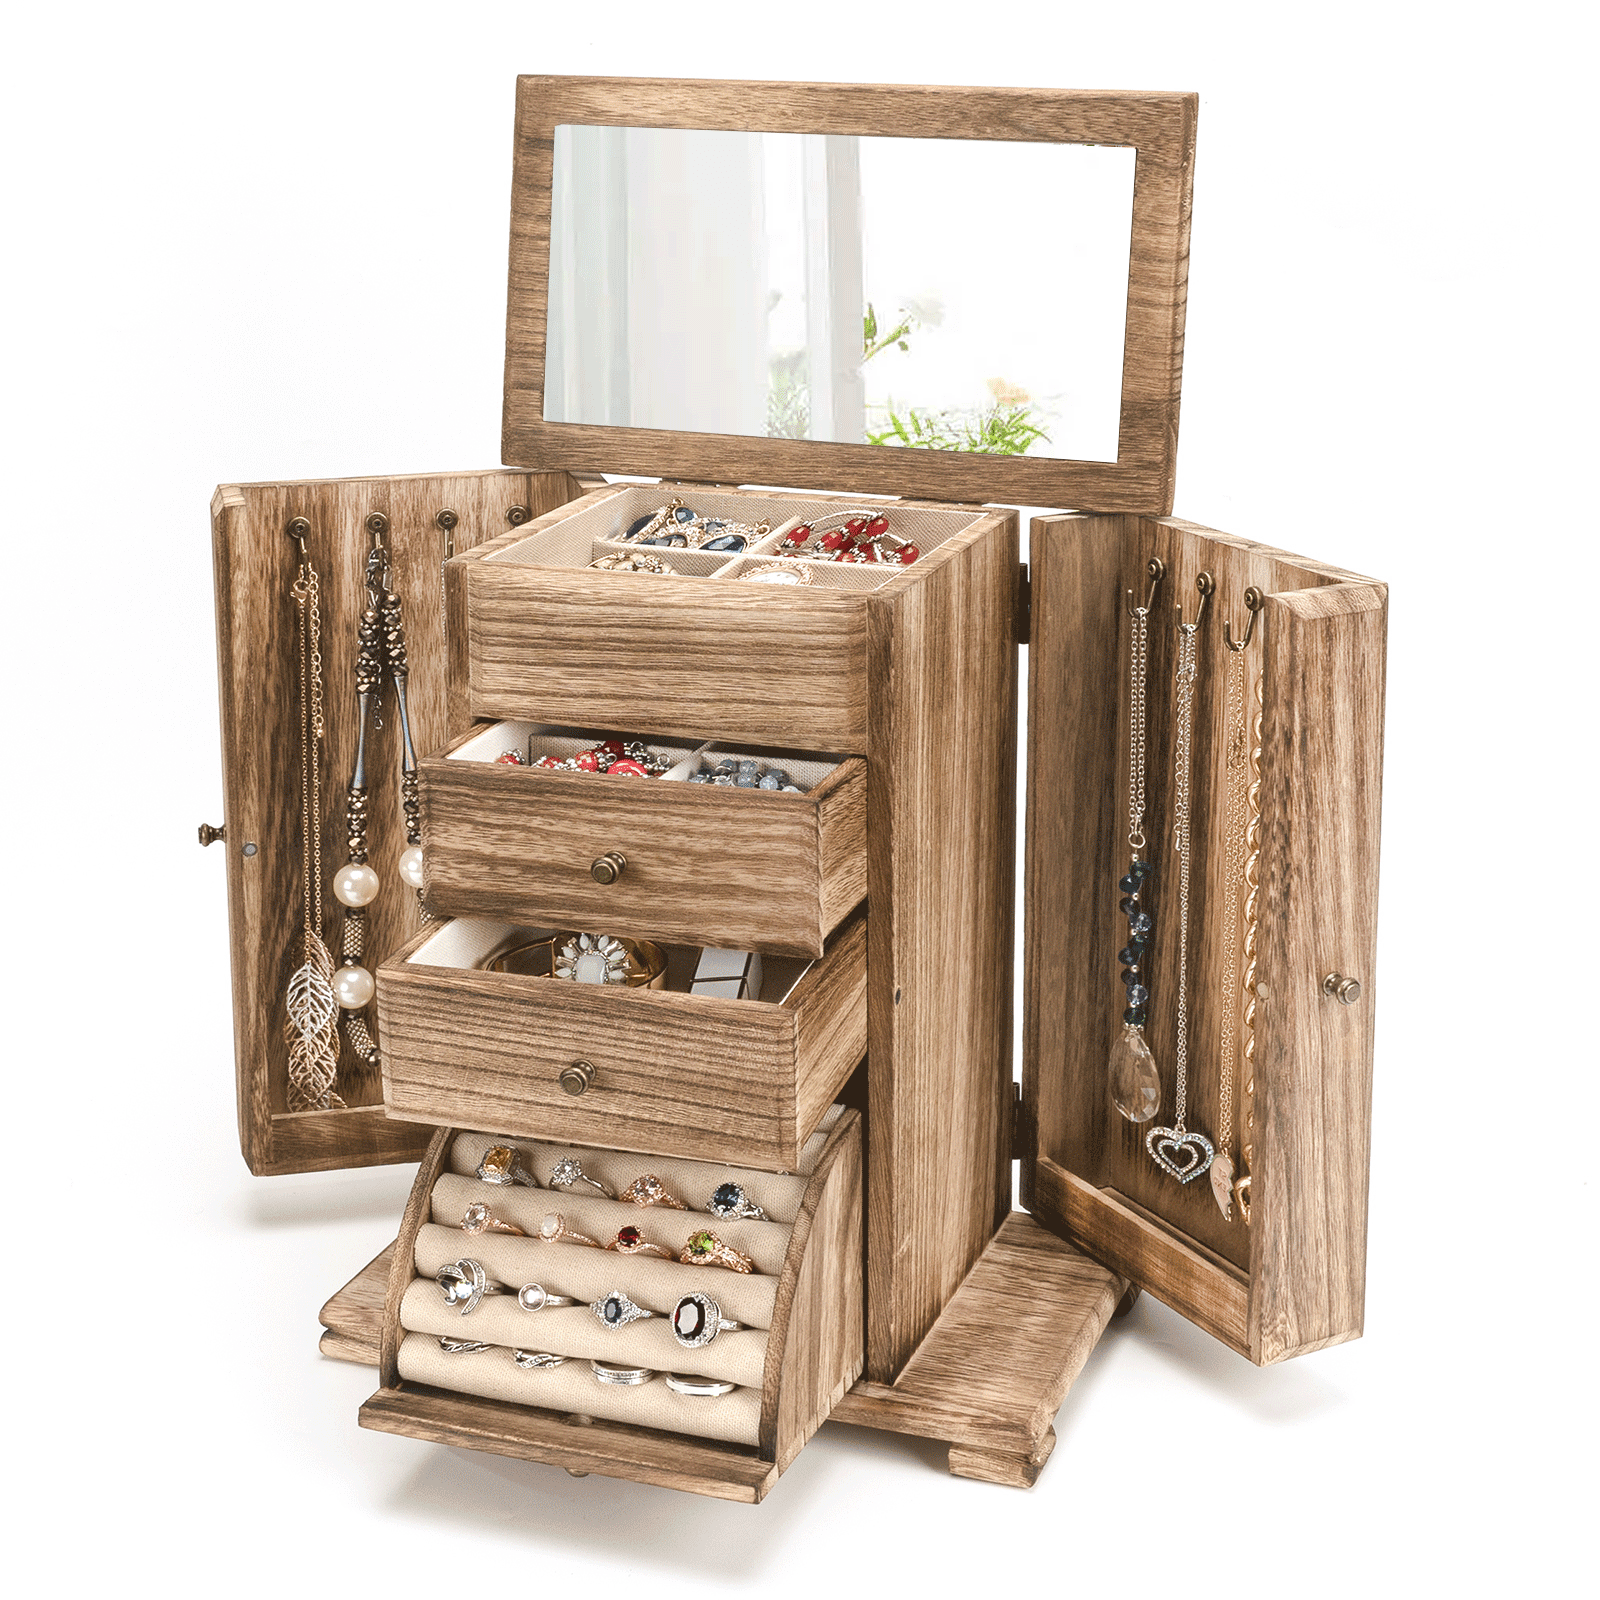 Sfugno Jewelry Box for Women, Rustic Wooden Jewelry Boxes & Organizers with  Mirror, 4 Layer Jewelry Organizer Box Display for Rings Earrings Necklaces